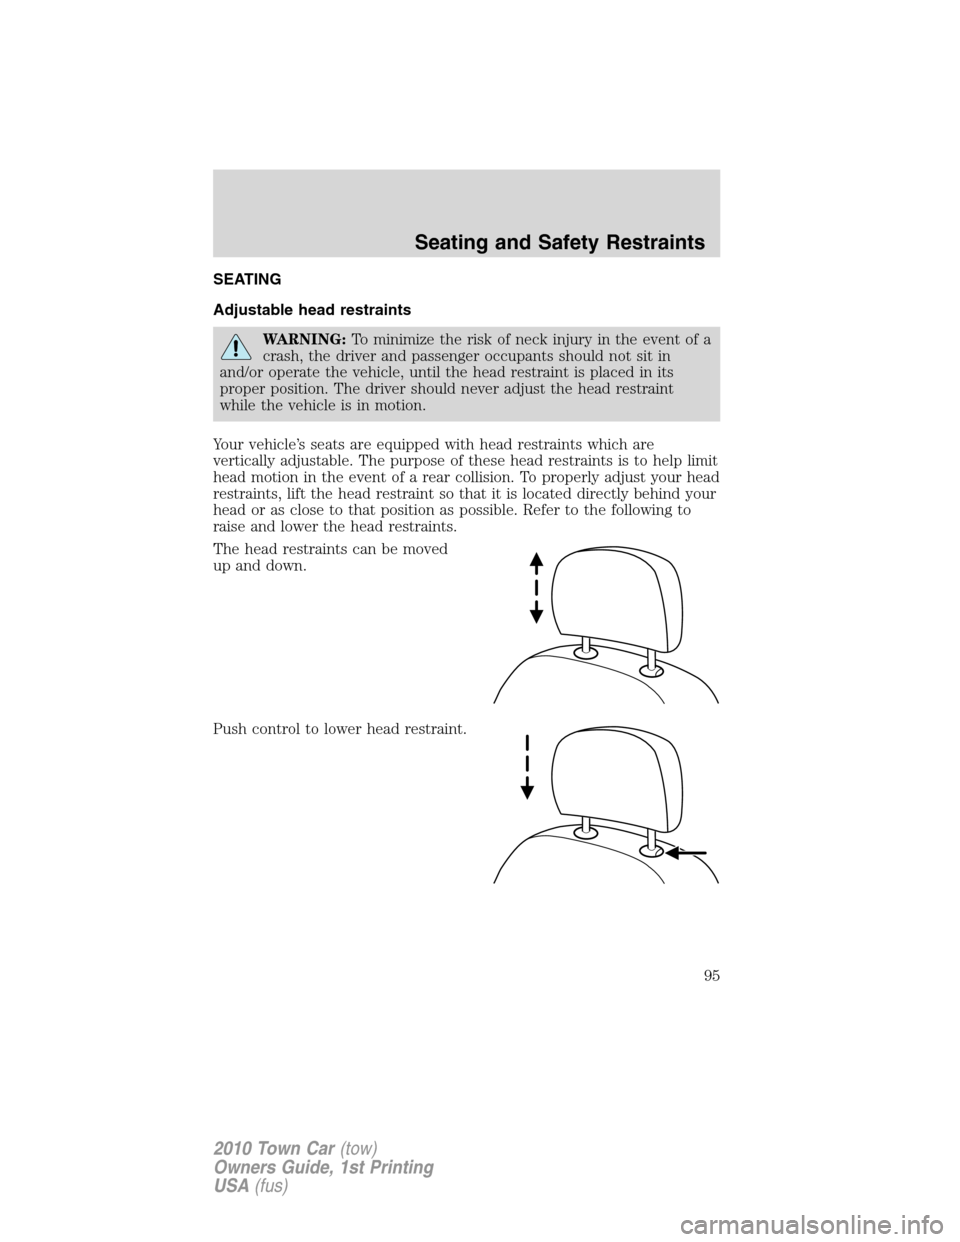 LINCOLN TOWN CAR 2010  Owners Manual SEATING
Adjustable head restraints
WARNING:To minimize the risk of neck injury in the event of a
crash, the driver and passenger occupants should not sit in
and/or operate the vehicle, until the head 